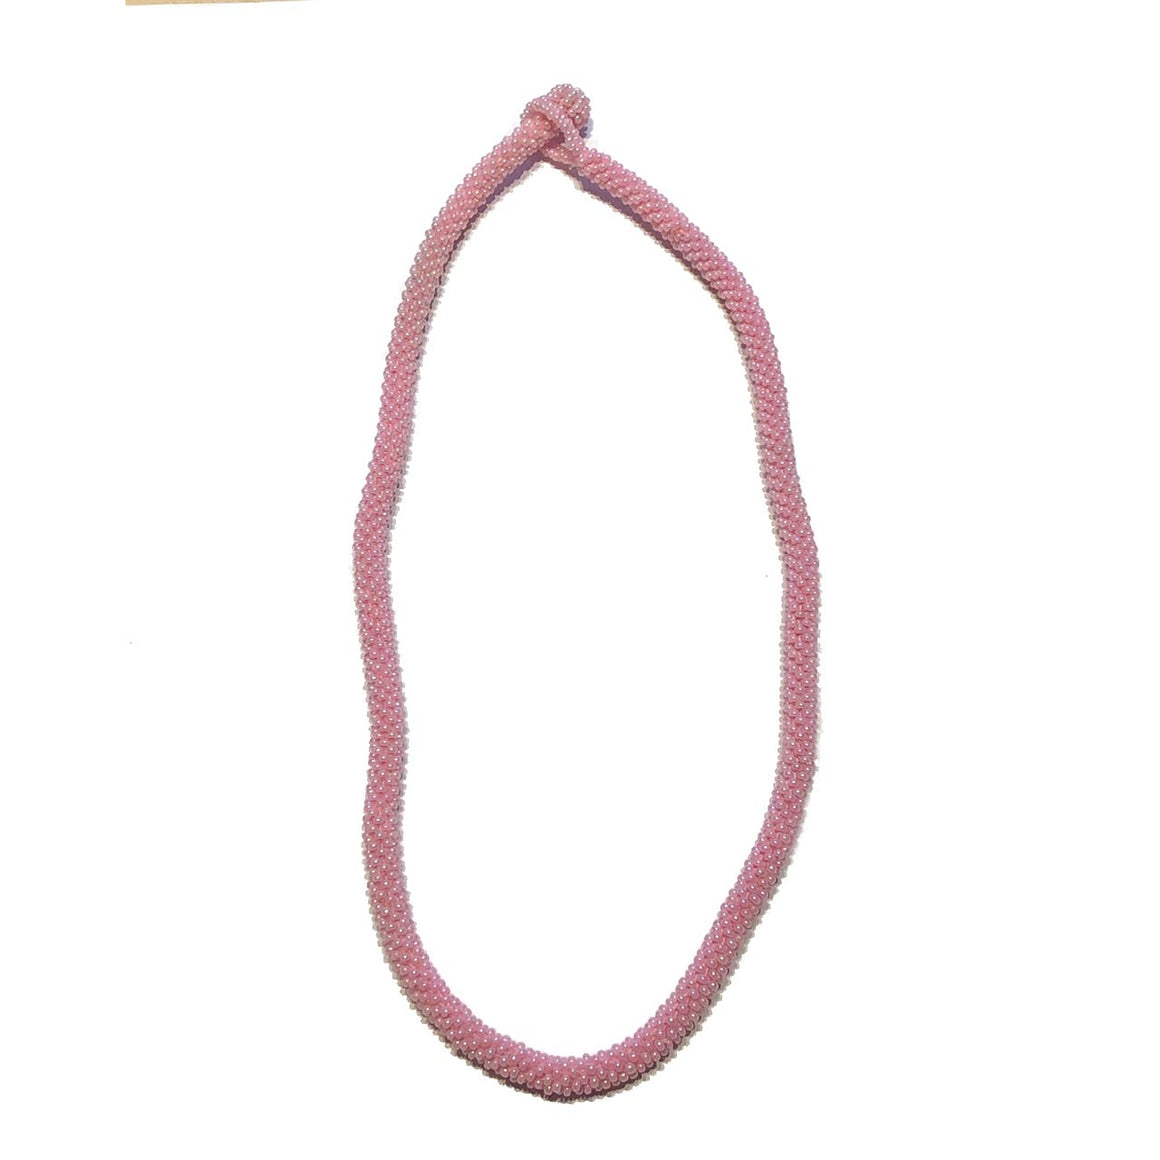 Hand Crocheted Pink Coloured Glass Bead Necklace 19.5 inches or 22 inch Length